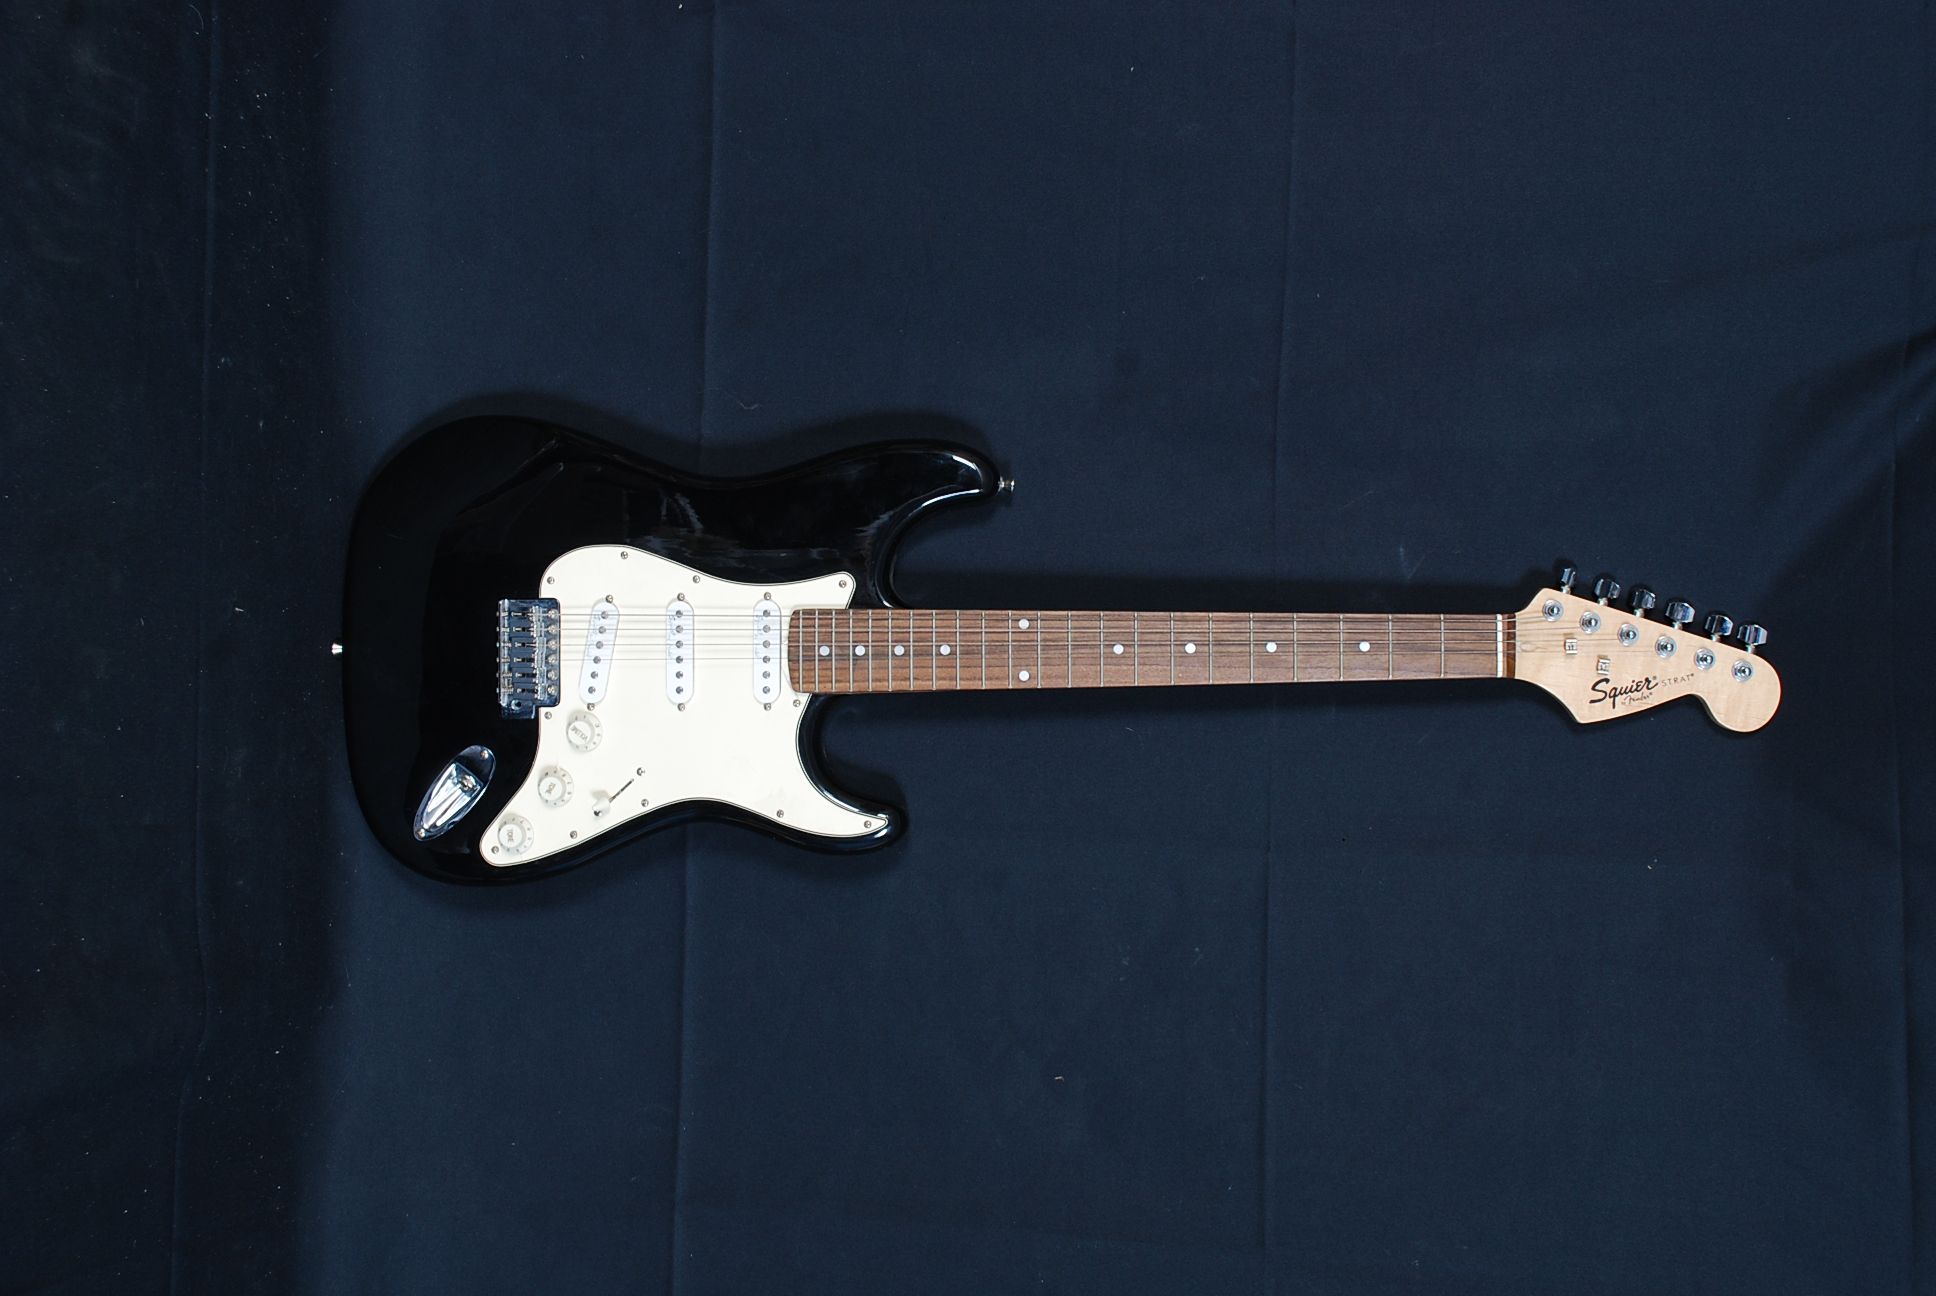 An electric Squire Fender Strat guitar together with an un-associated case